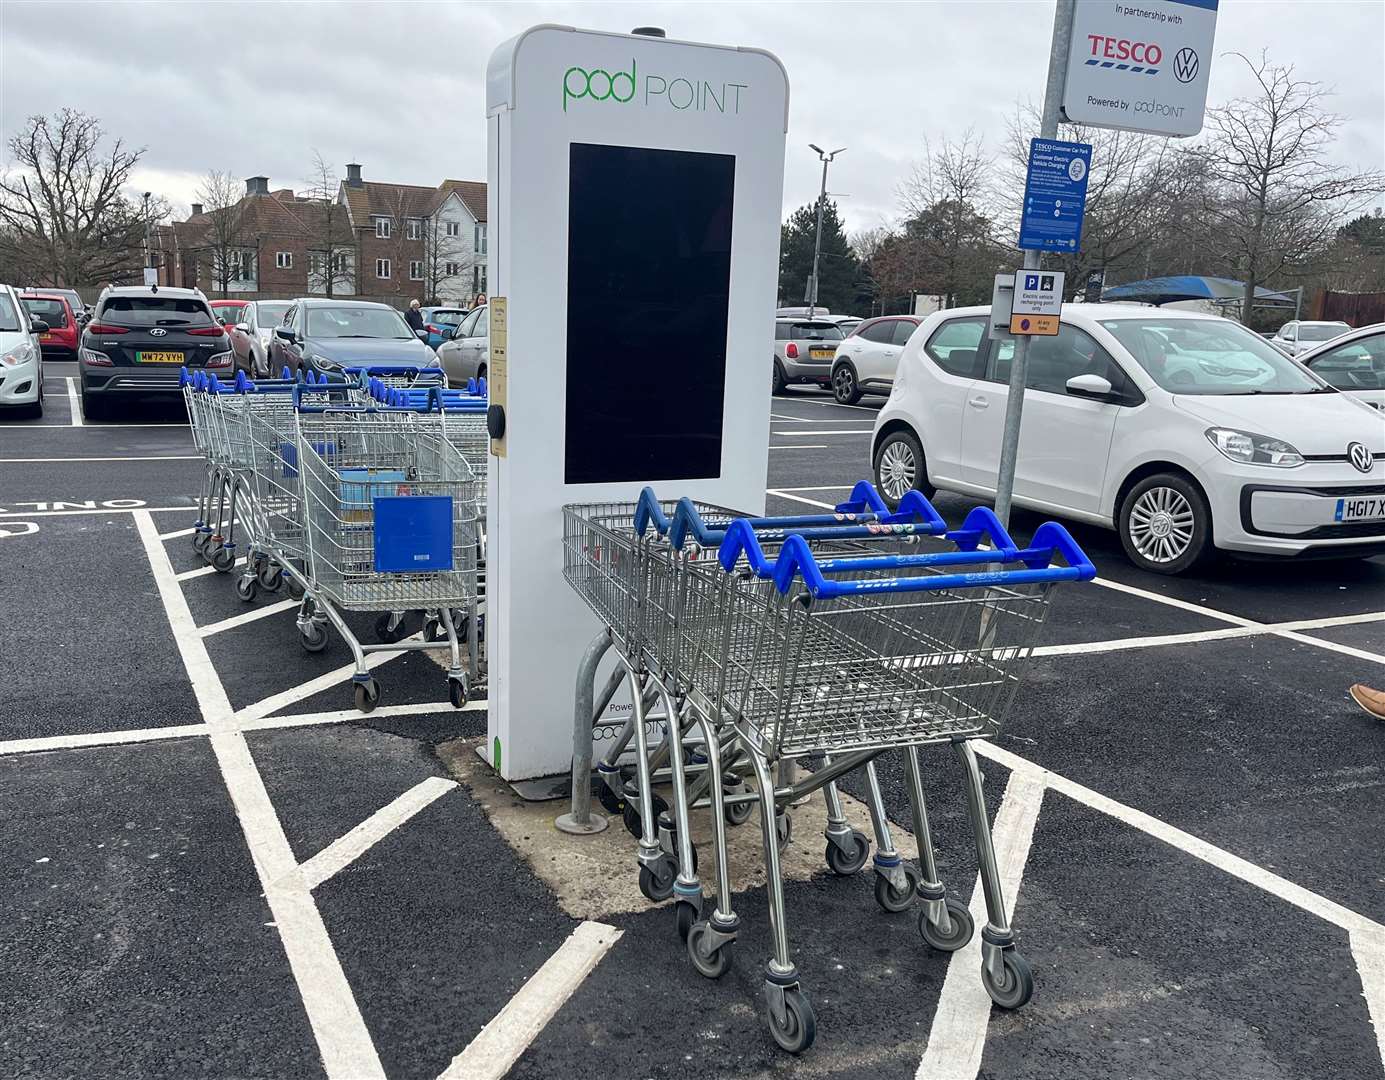 A lack of a trolley bays has left many abandoned at the electric car charging point